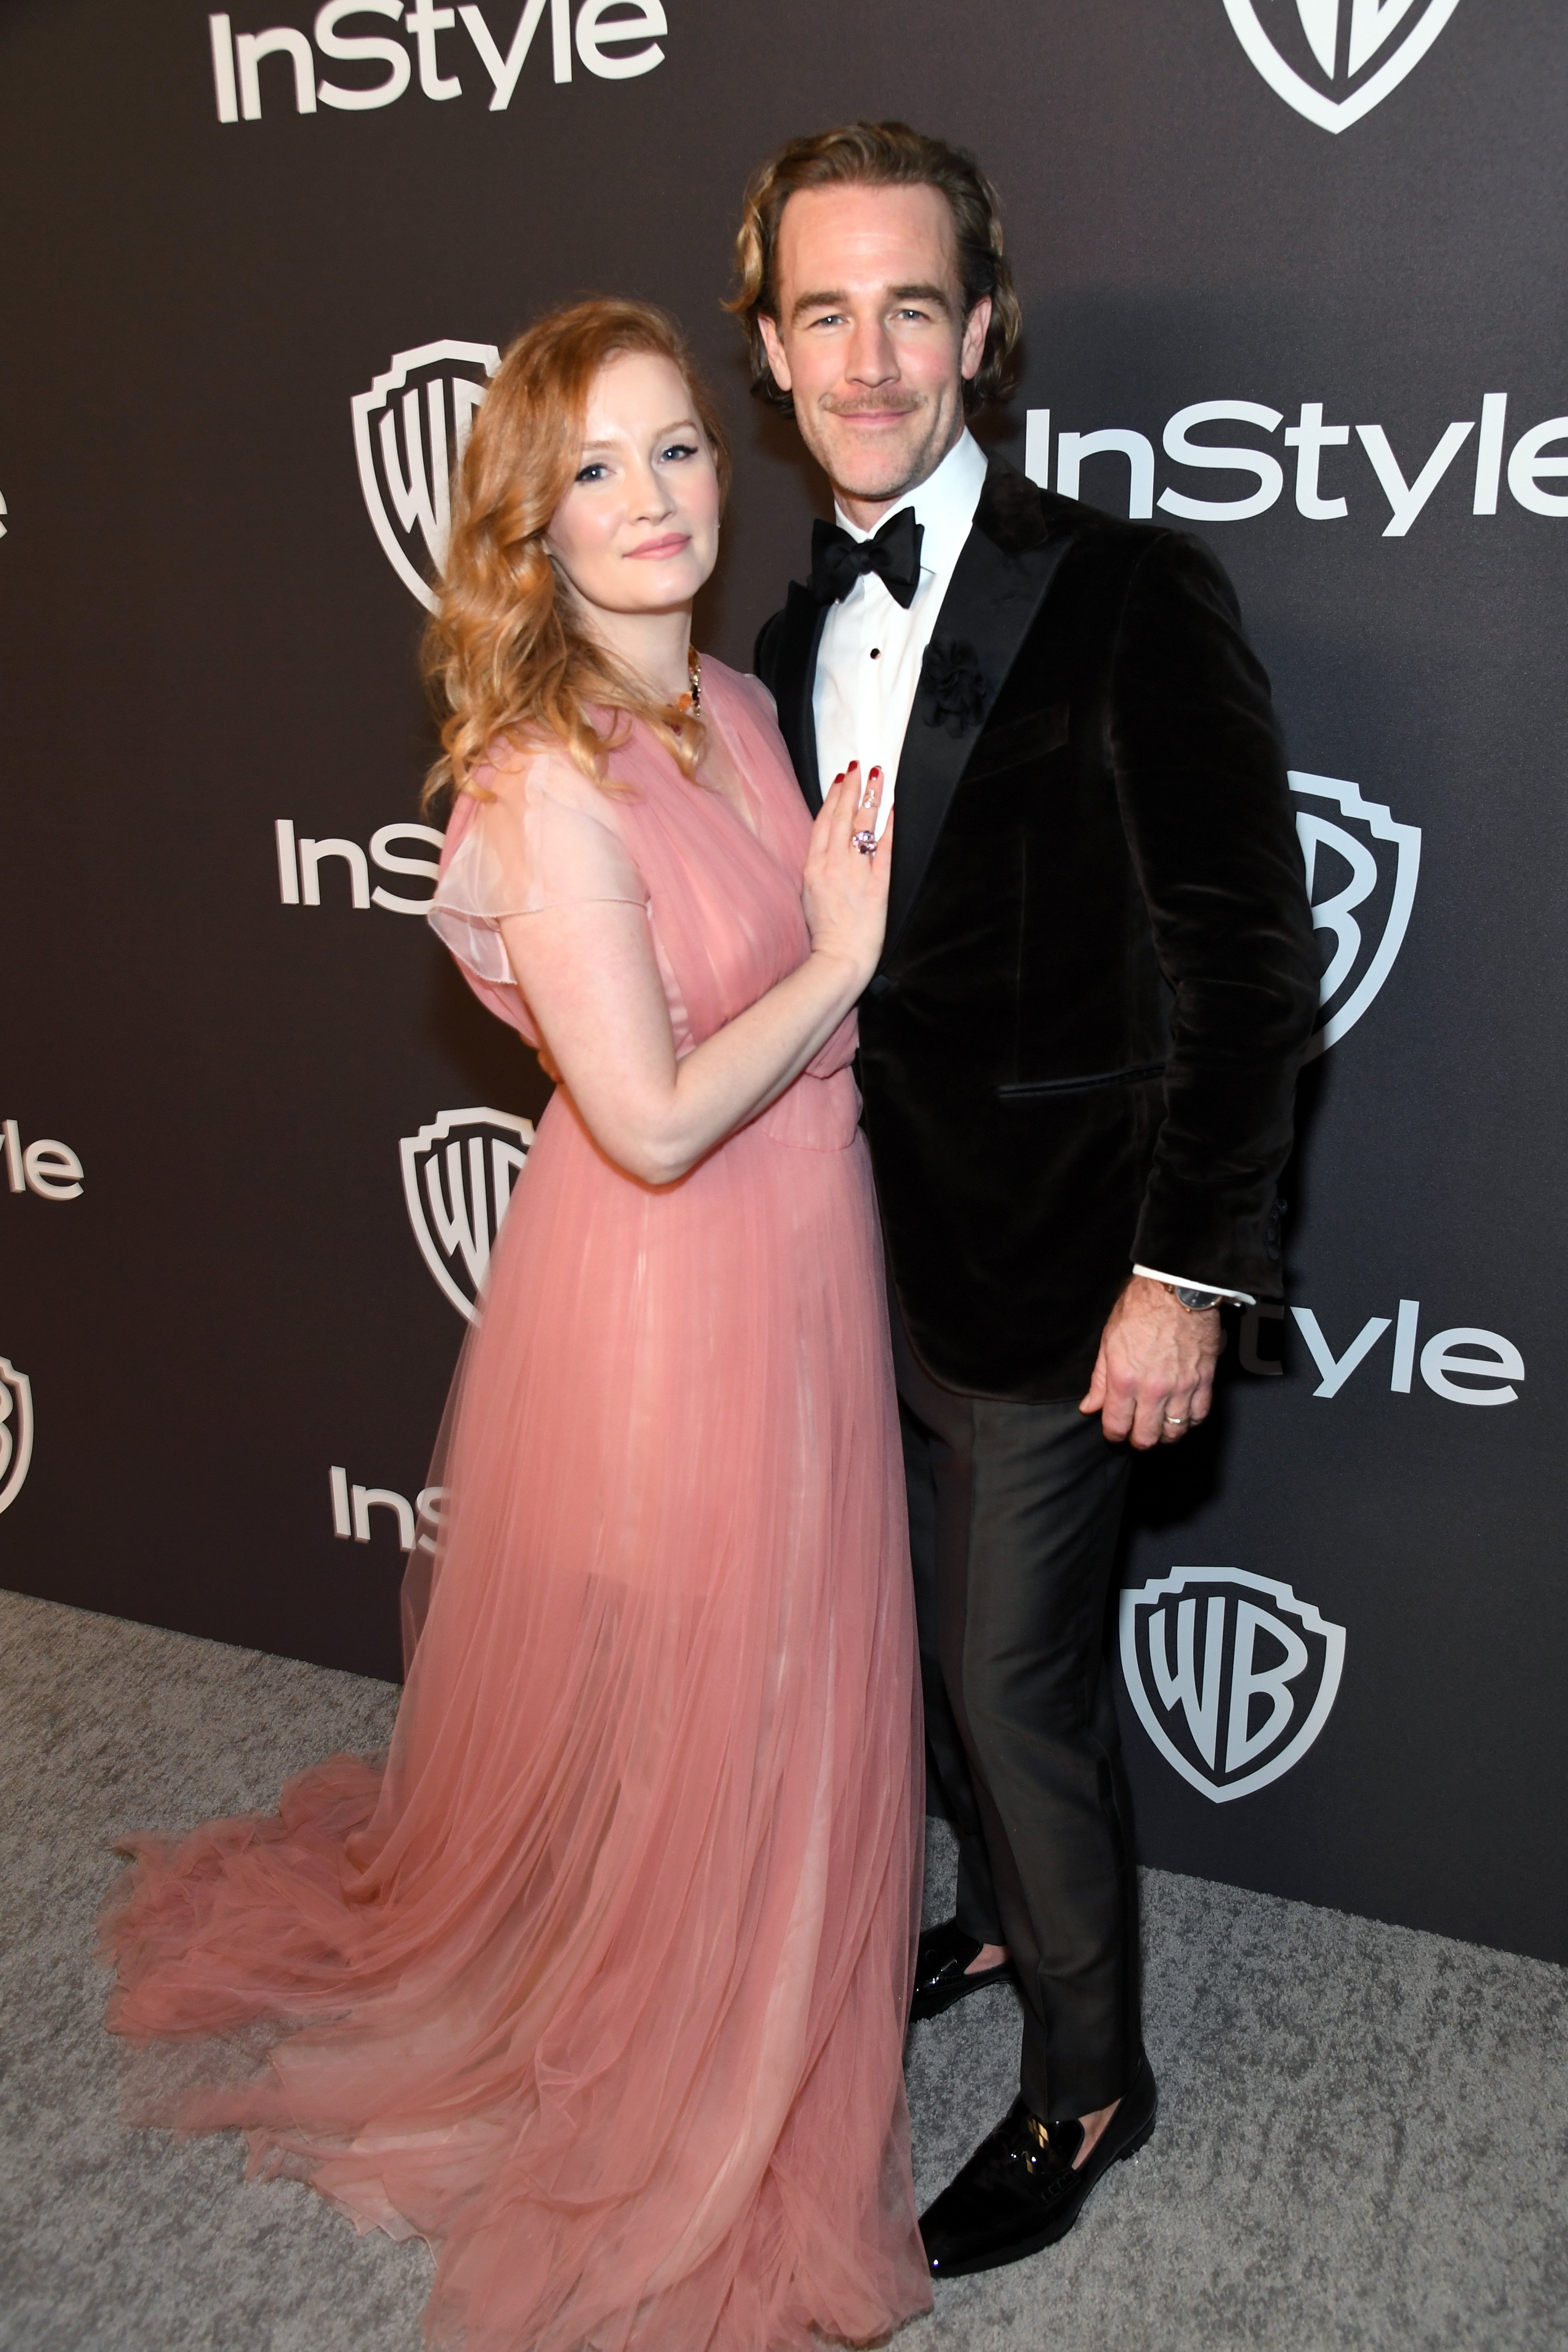 Kimberly Van Der Beek and James Van Der Beek attend the 2019 InStyle and Warner Bros. 76th Annual Golden Globe Awards at The Beverly Hilton Hotel on January 6, 2019 in Beverly Hills, California | Photo: Getty Images